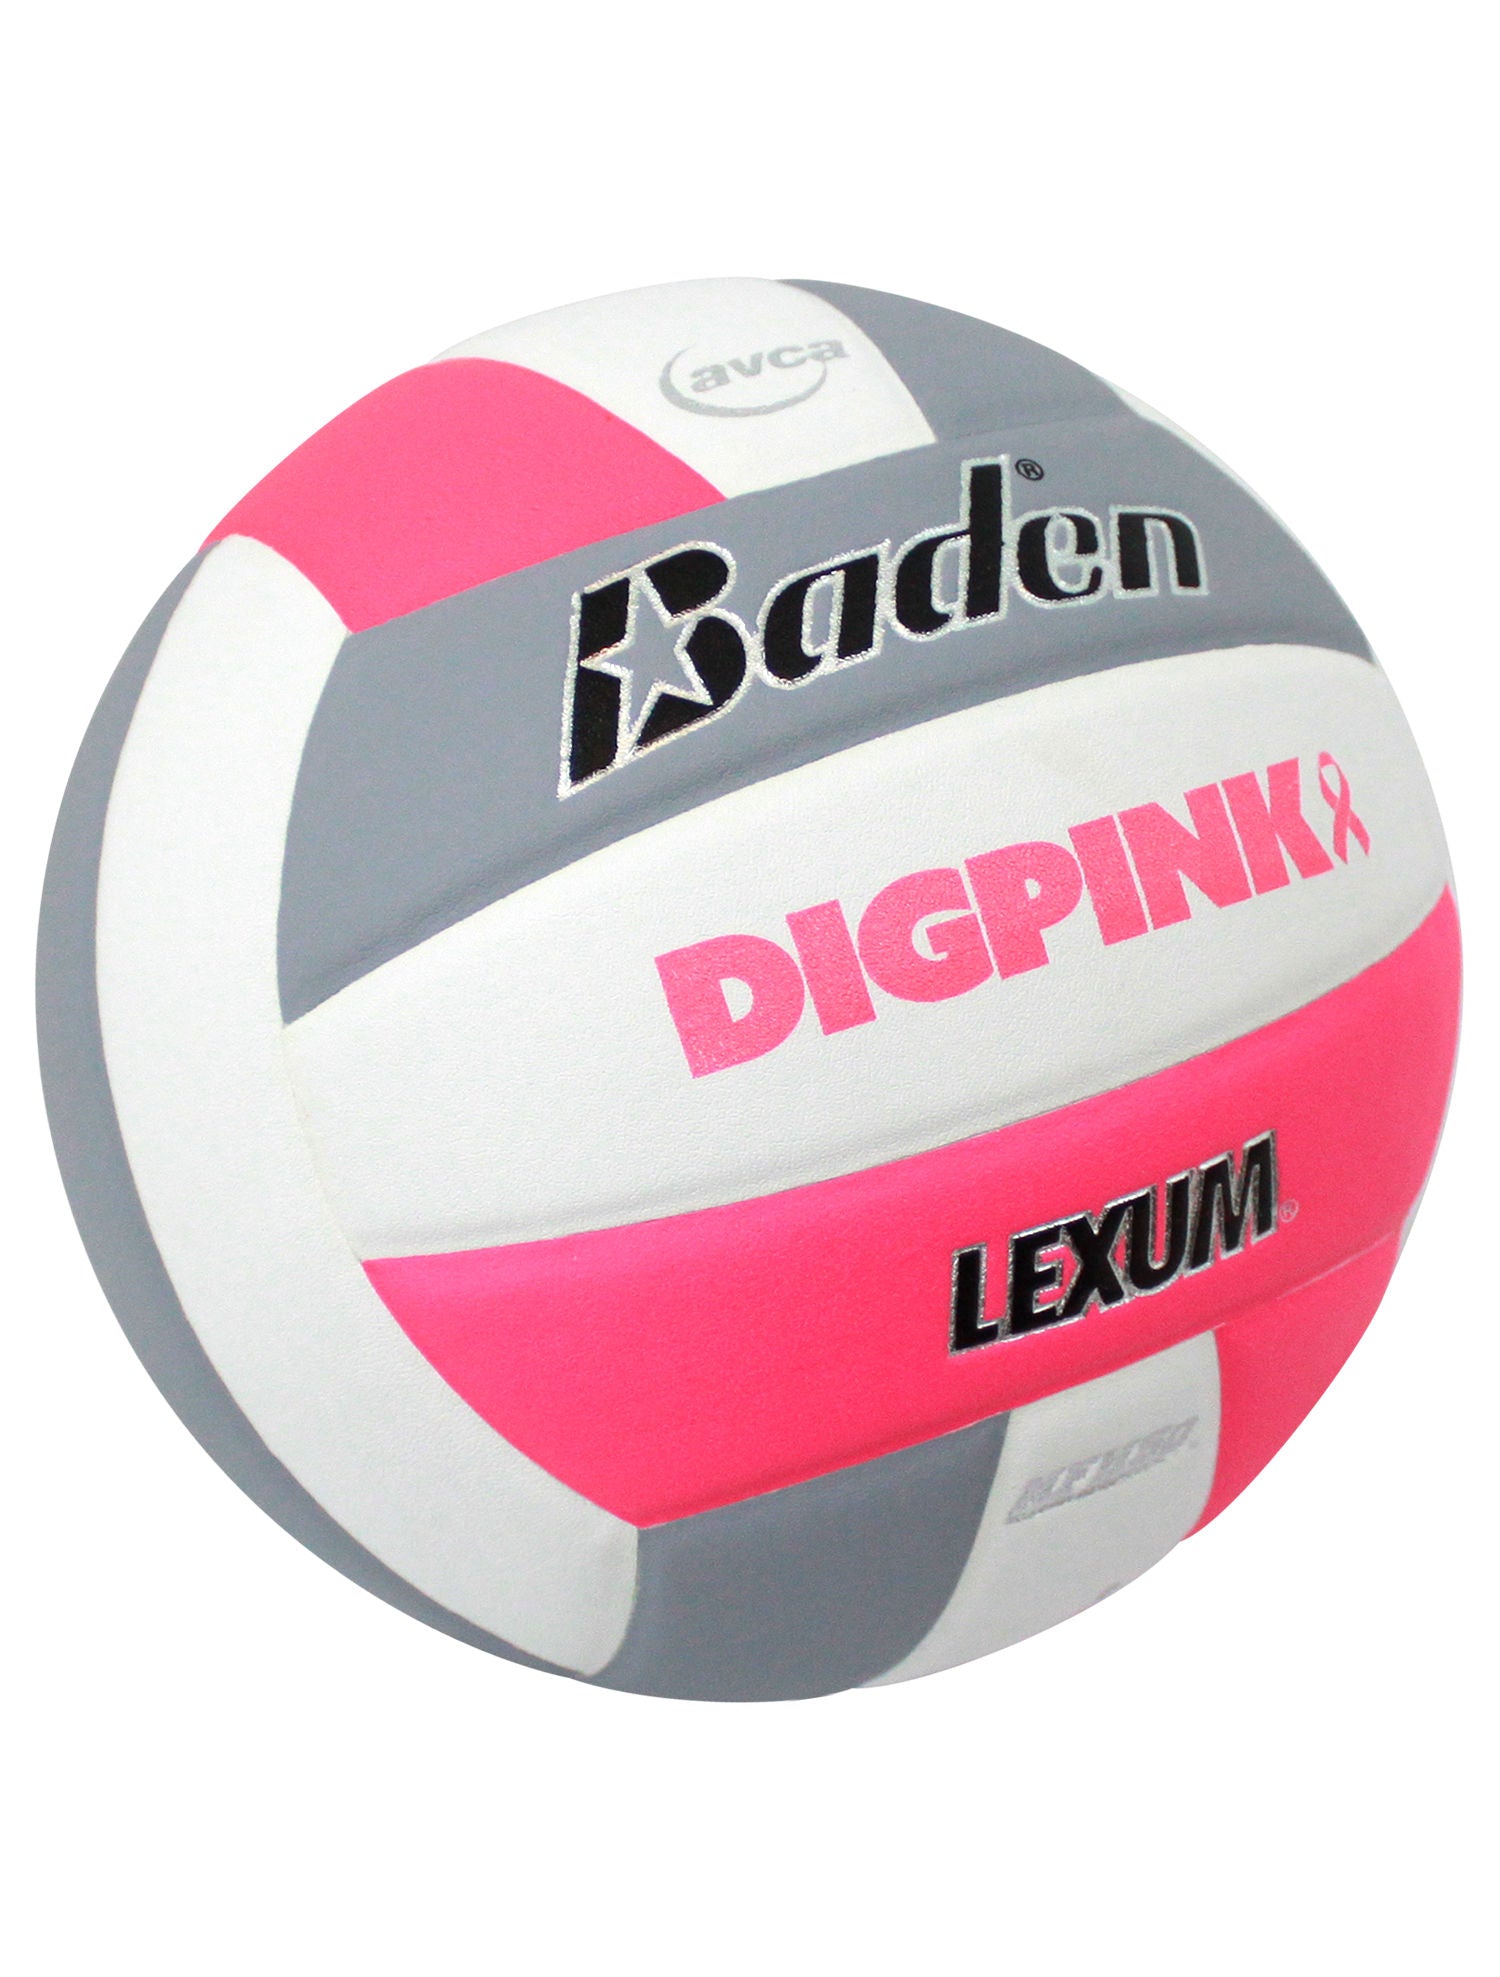 Official Baden Lexum Dig Pink® Microfiber Volleyball with Logos